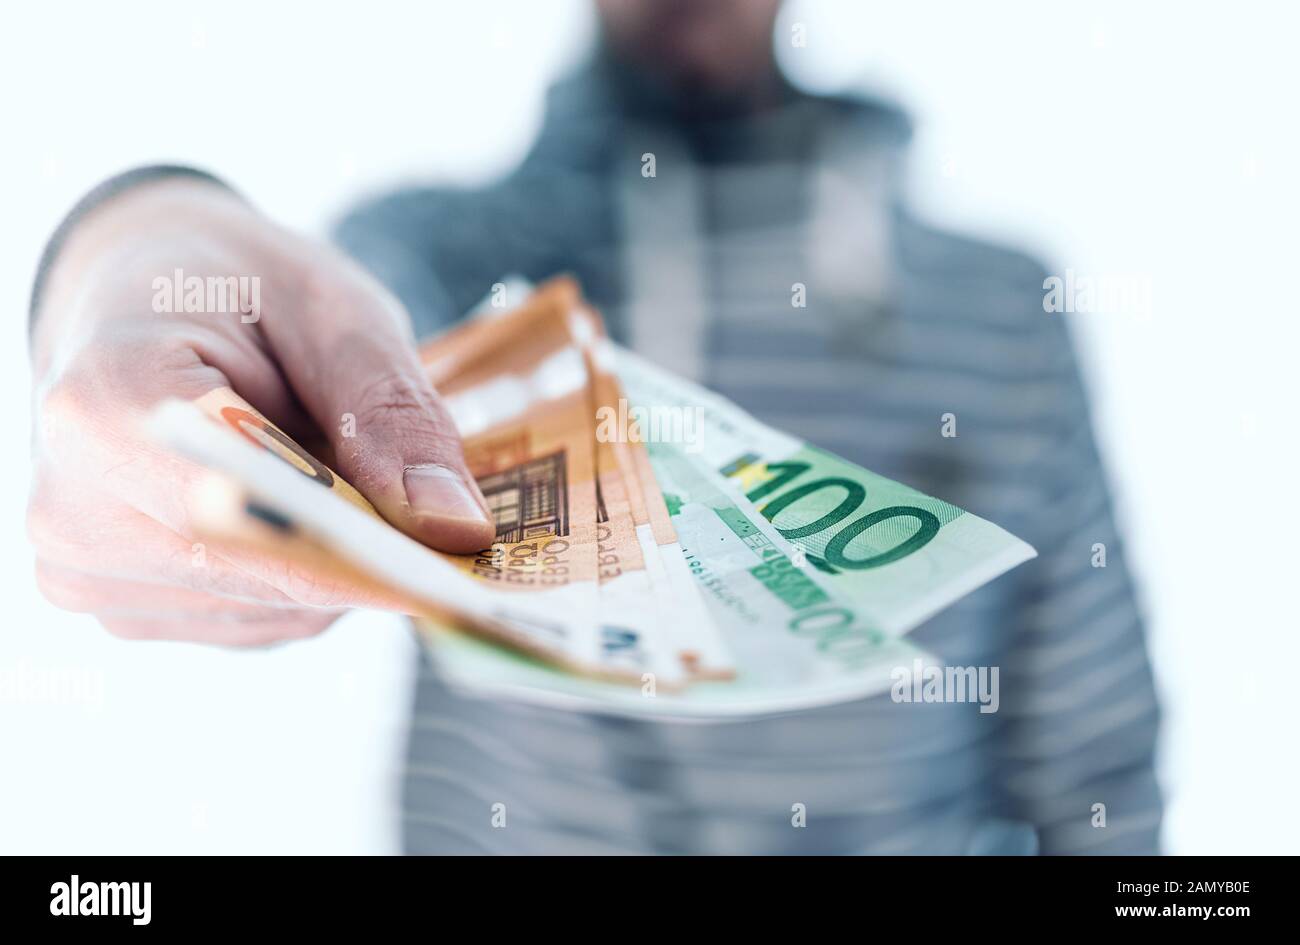 midsection of man holding banknotes in his hand handing it over to someone, paying with cash concept Stock Photo